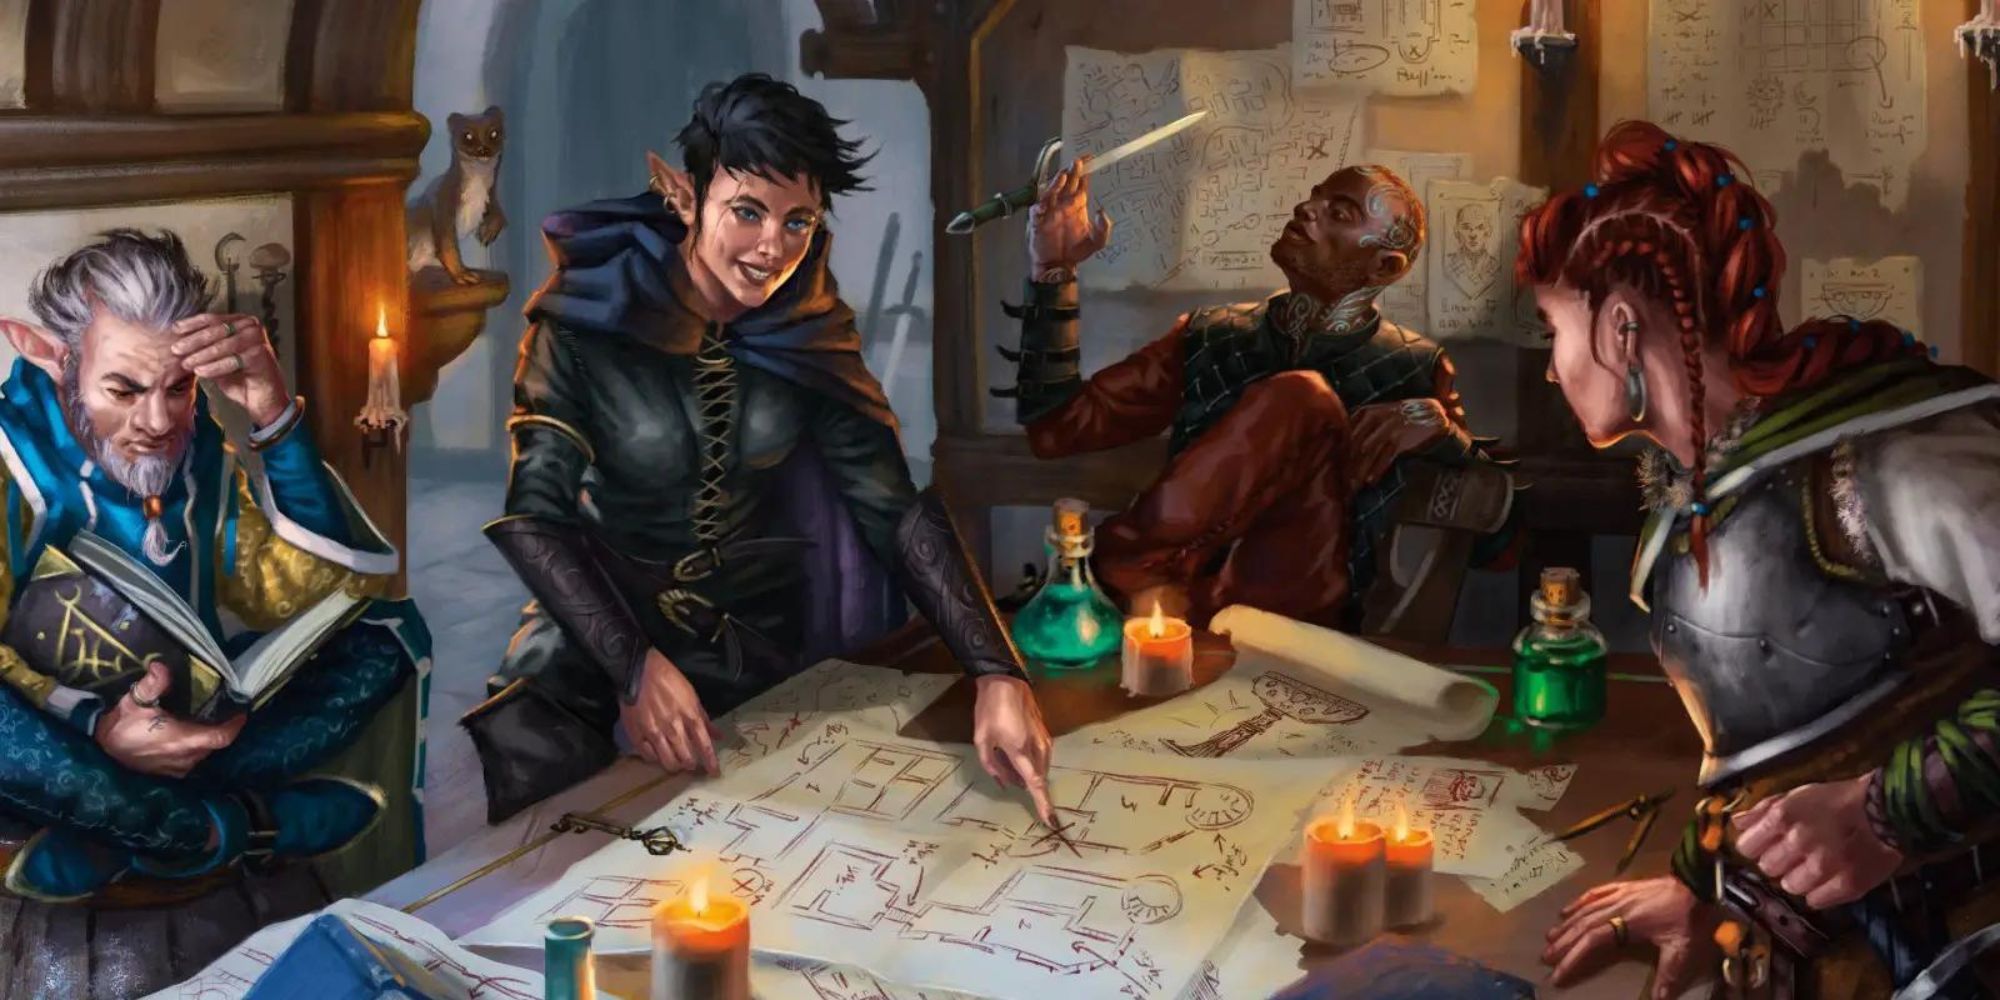 A group of adventurers chart together a detailed plan around a meeting table